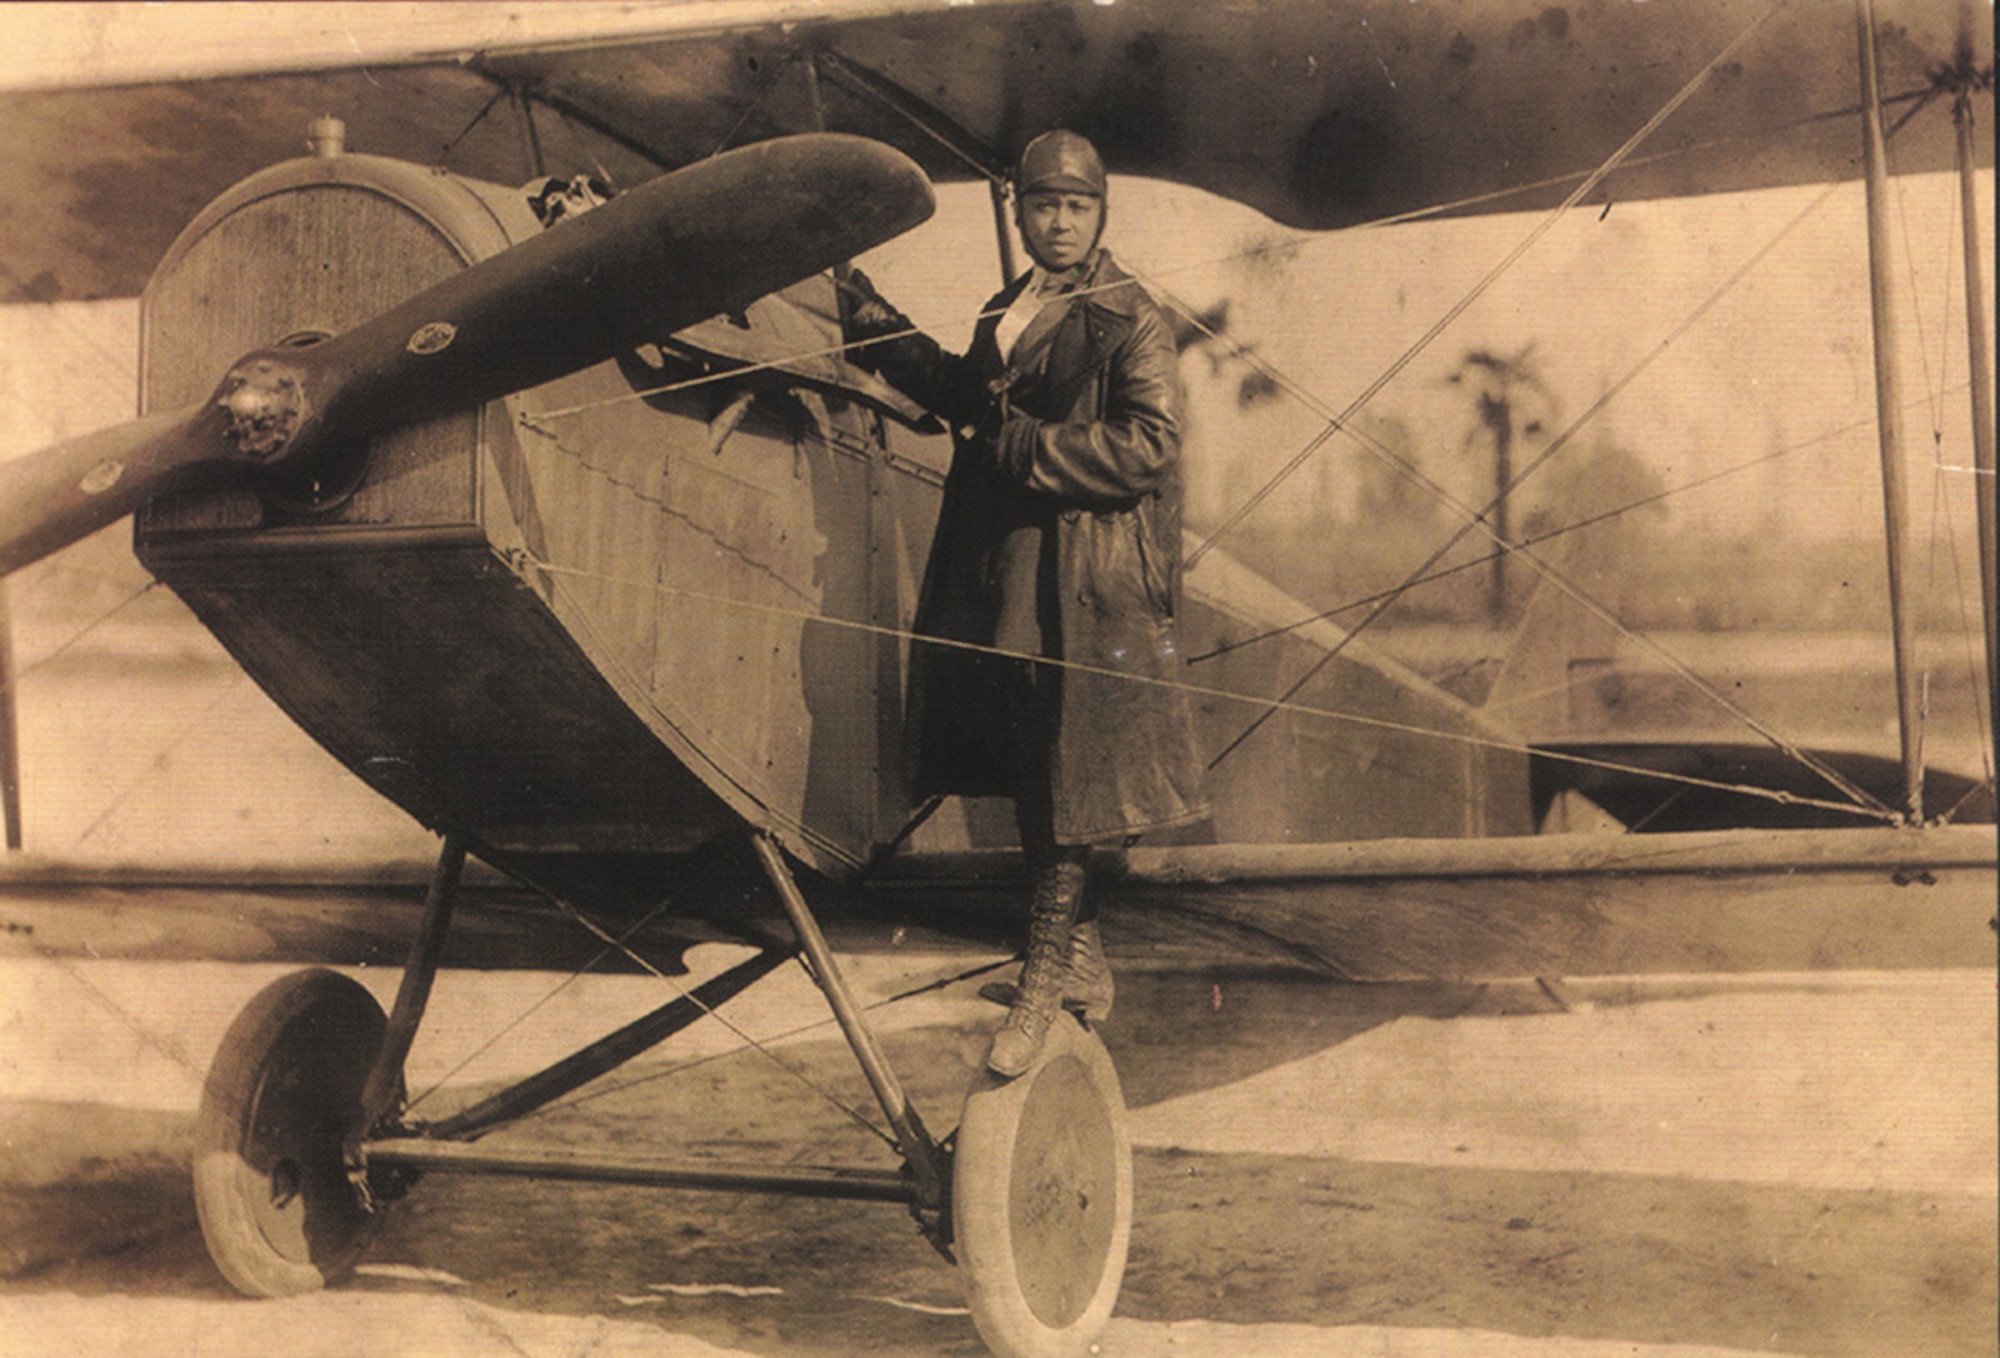 Bessie Coleman: First African-American female pilot performed aerial shows throughout the U.S.